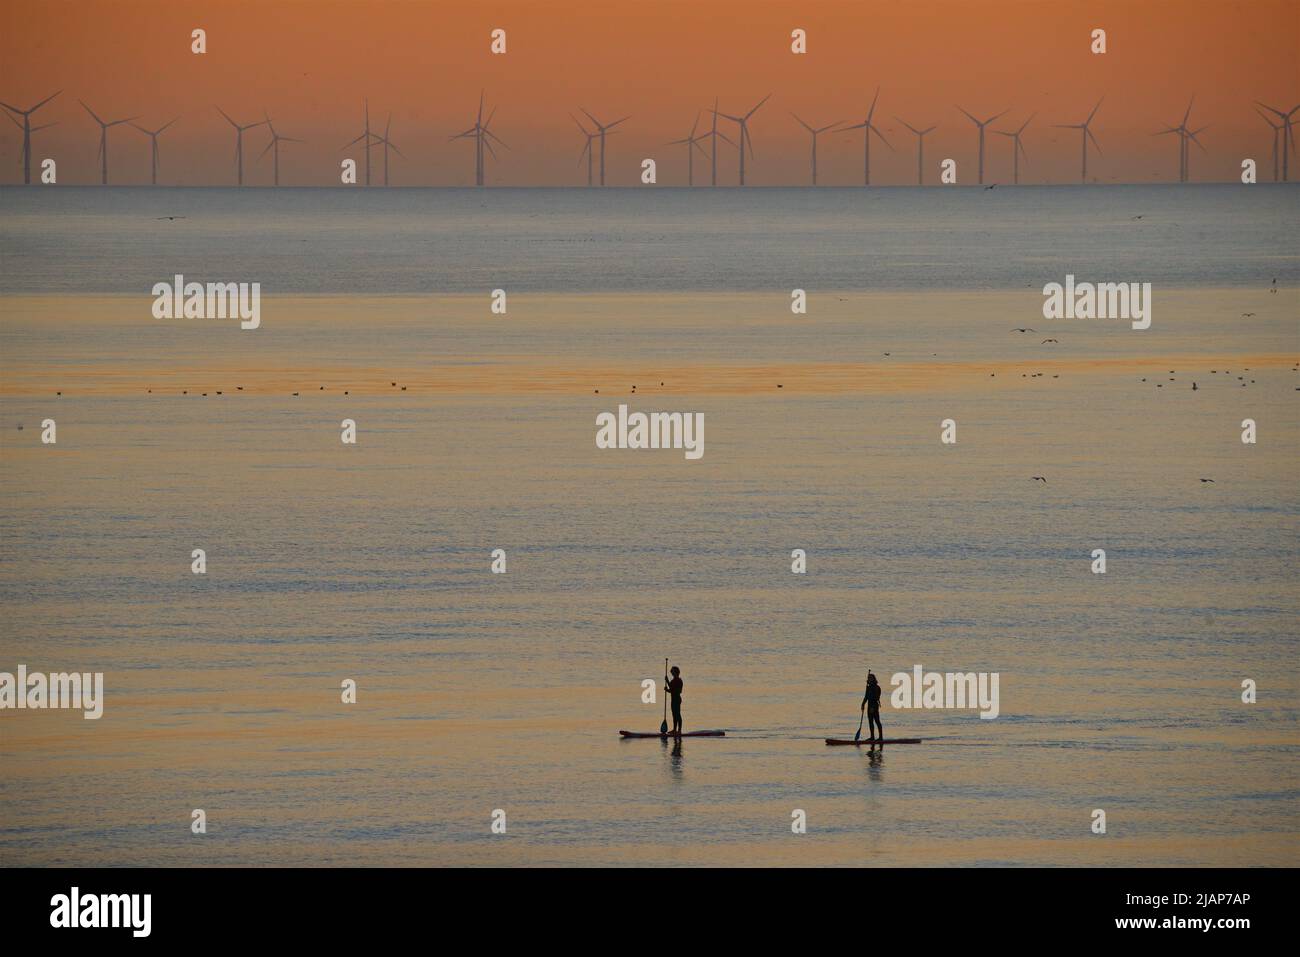 Paddleboarding couple in the sea off Brighton, East Sussex, England, with the Rampion windfarm on the distant horizon. Silhouettes at dusk. Stock Photo